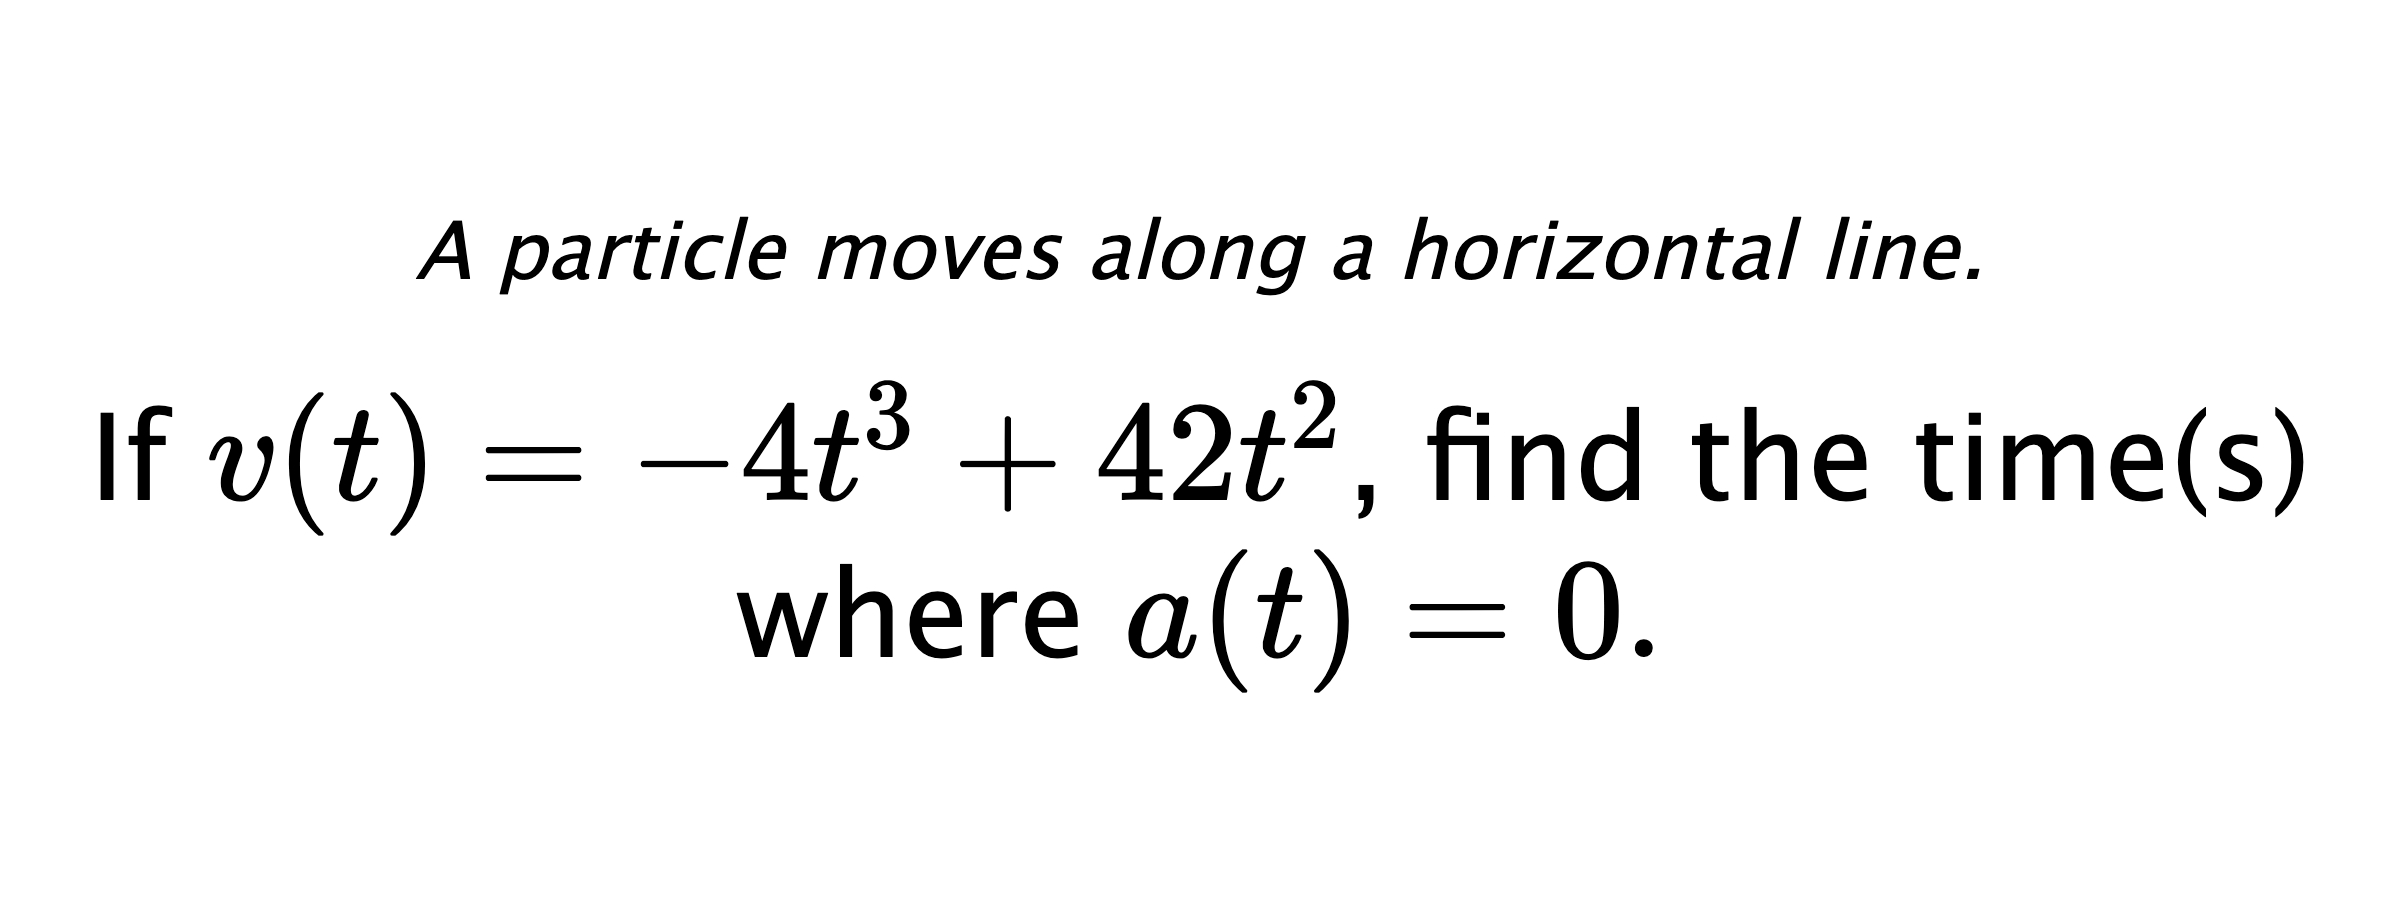 A particle moves along a horizontal line. If $ v(t)=-4t^3+42t^2 $, find the time(s) where $ a(t)=0 .$